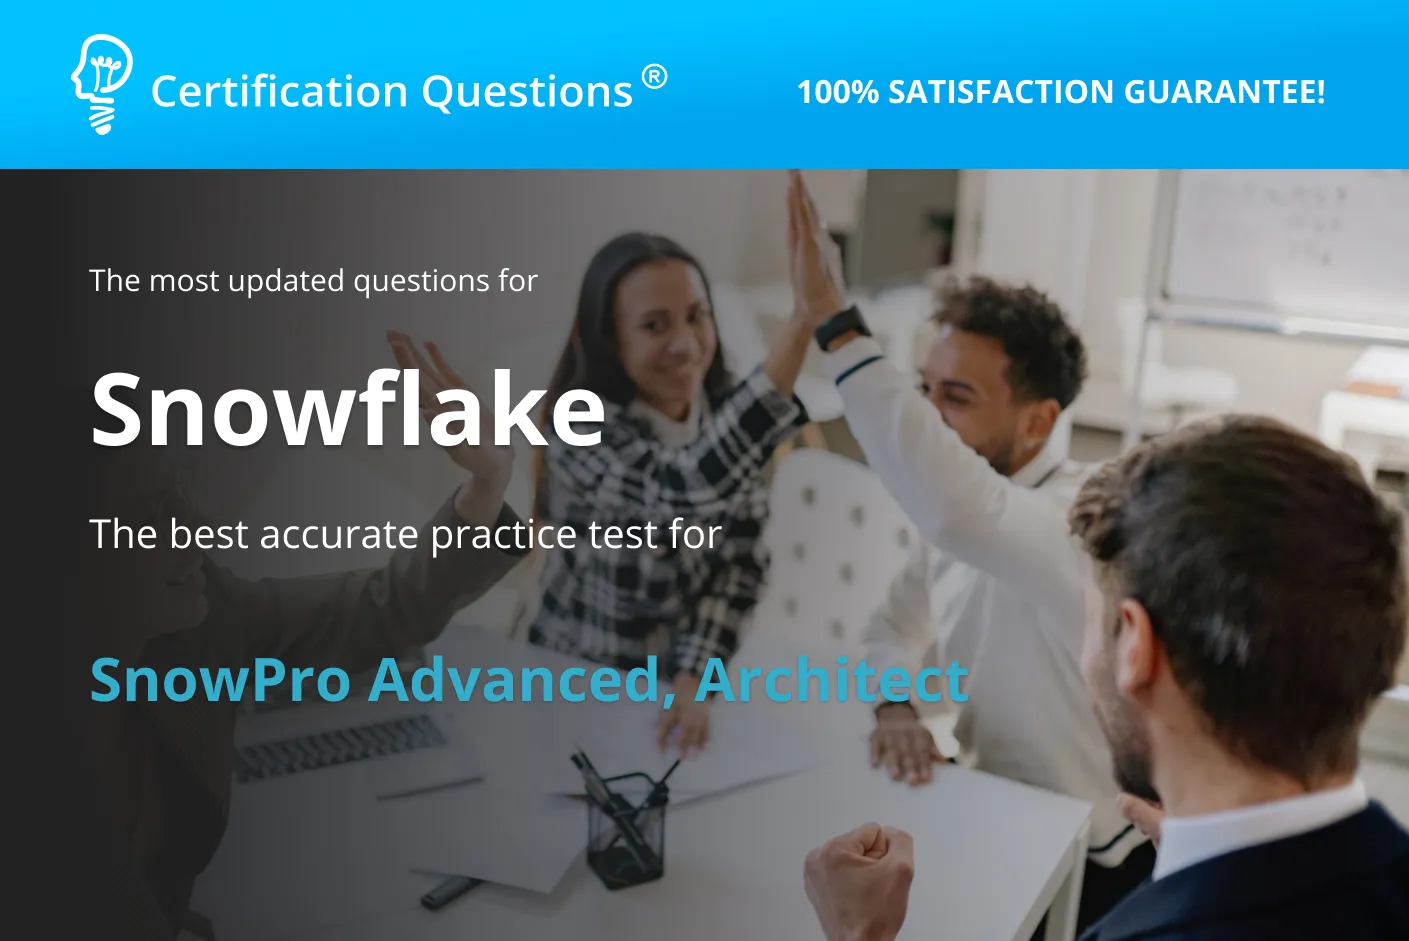 This image is related to the SnowPro Advanced Architect Certification questions in the United States